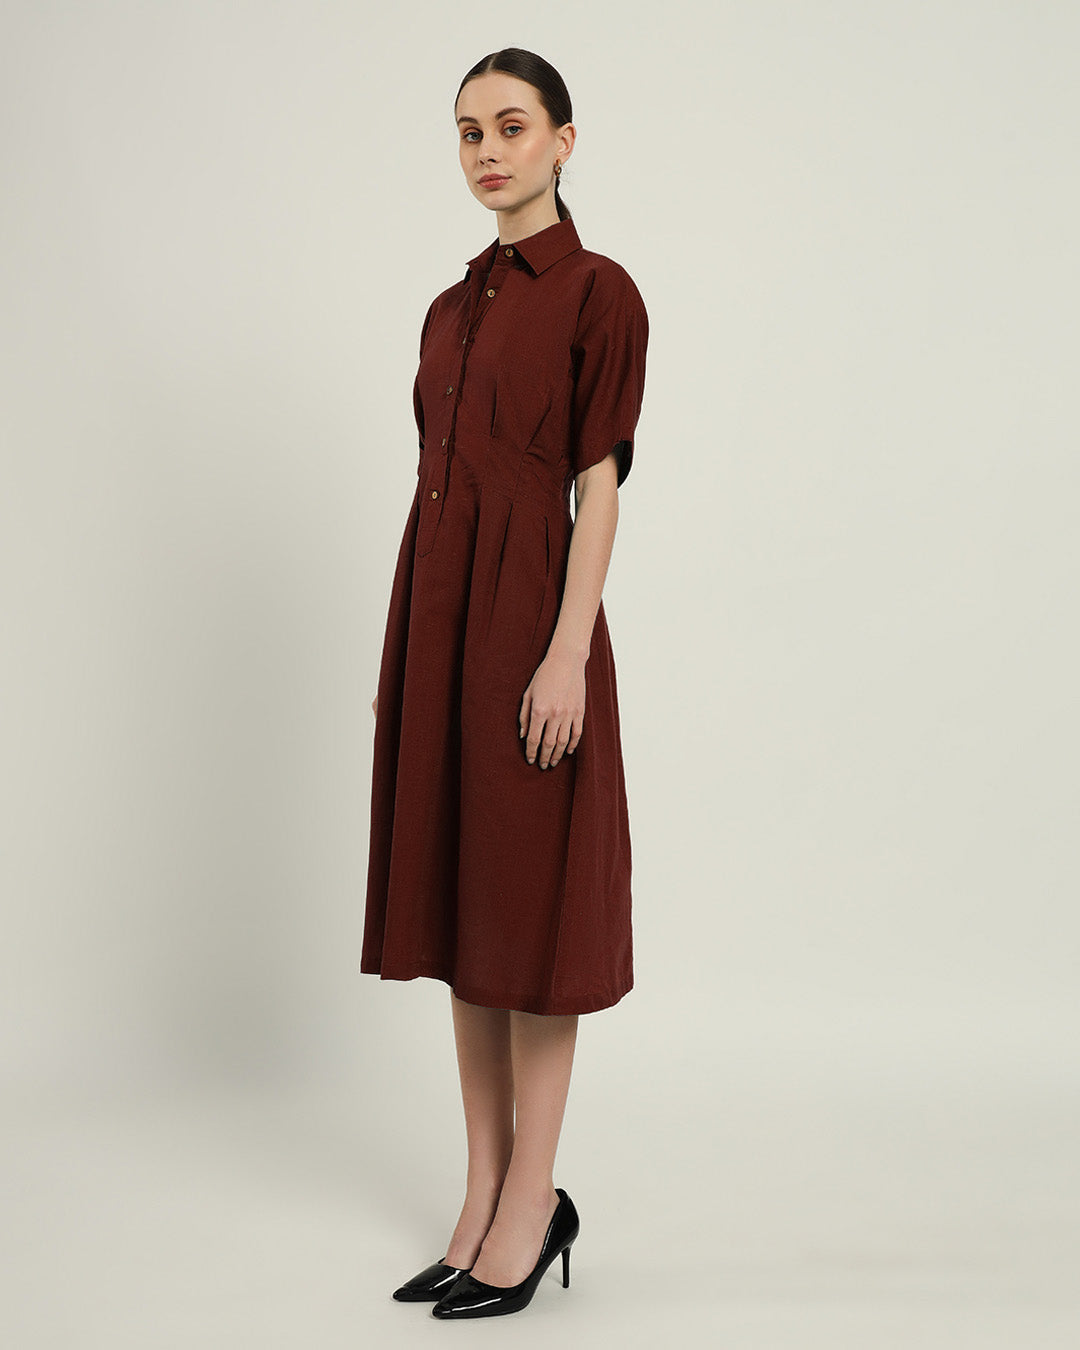 The Salford Rouge Dress